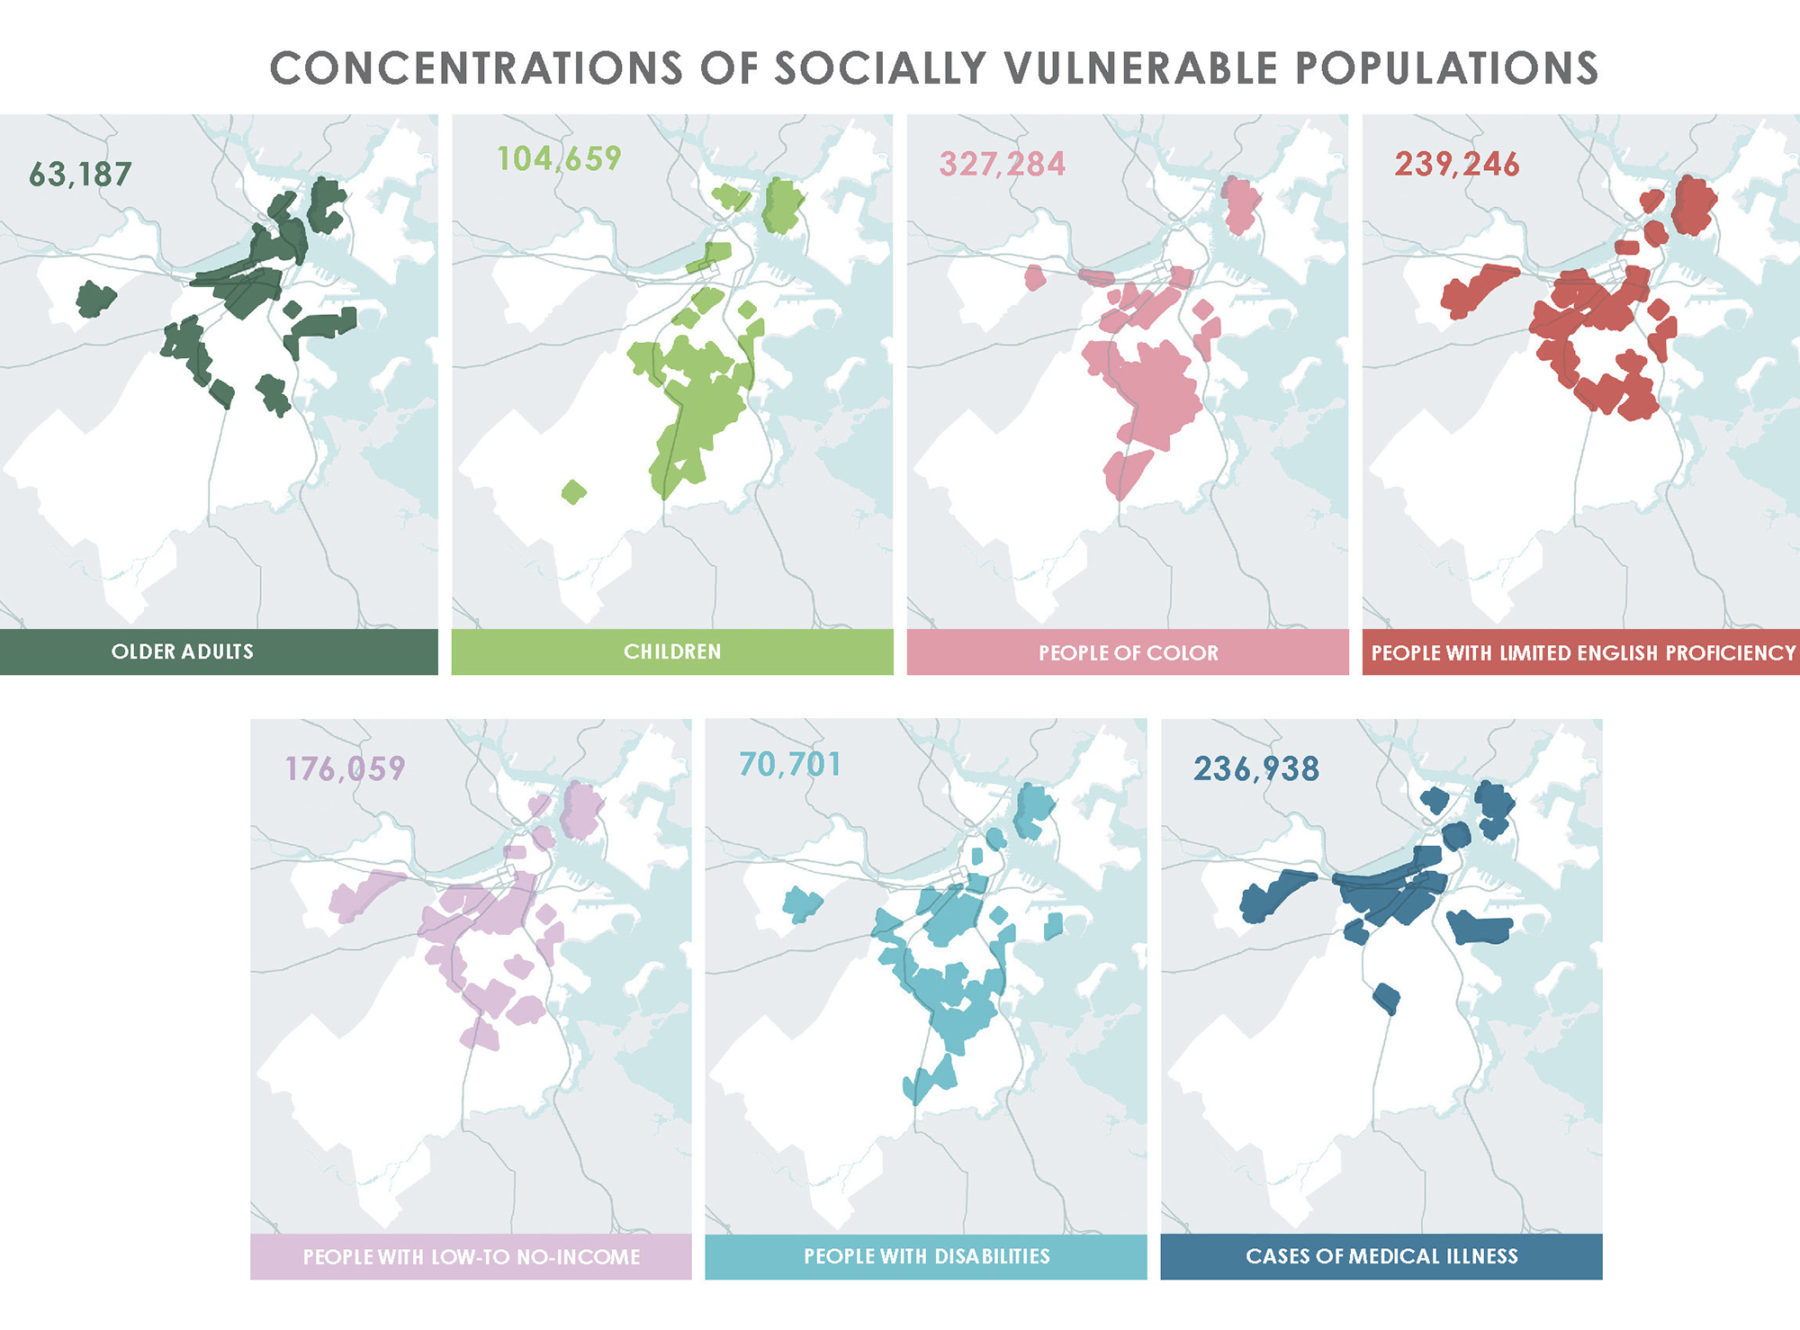 Maps of vulnerable populations